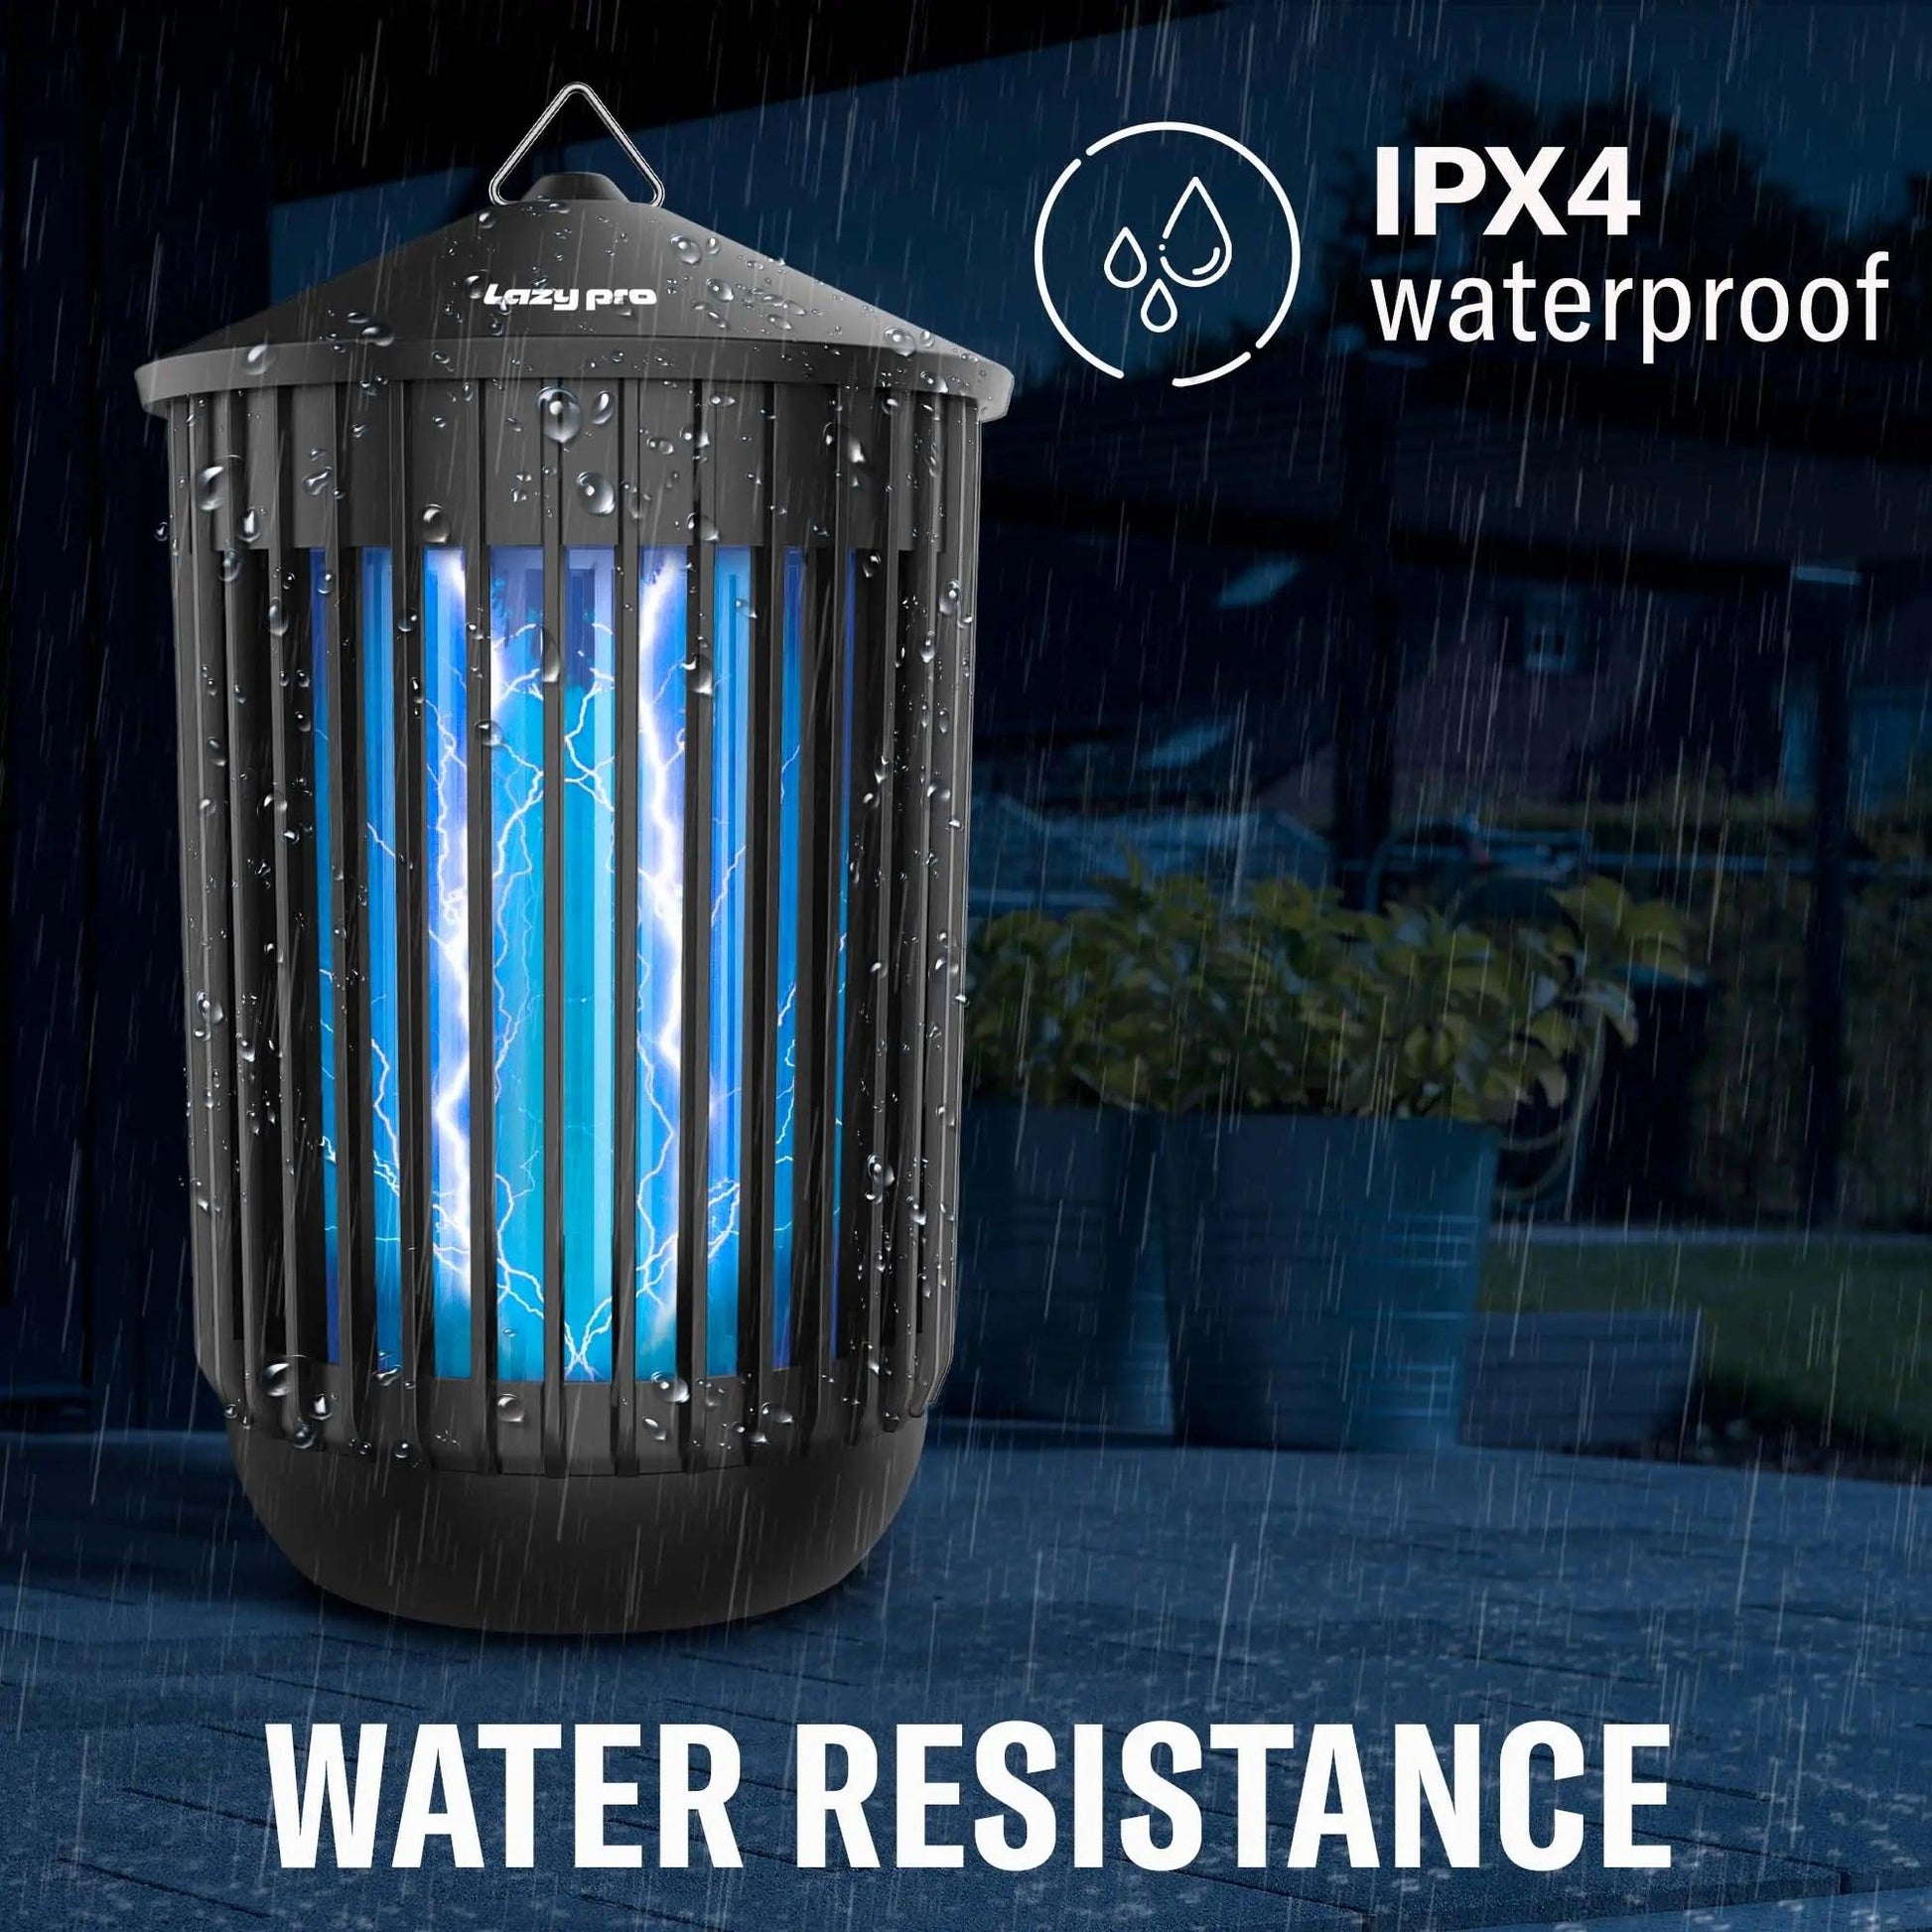 Lazy Pro ZAP X5000: Bug Zapper and Attractant, 20W Bulb, 5000V Grid, IPX7 Waterproof - Lazy Pro